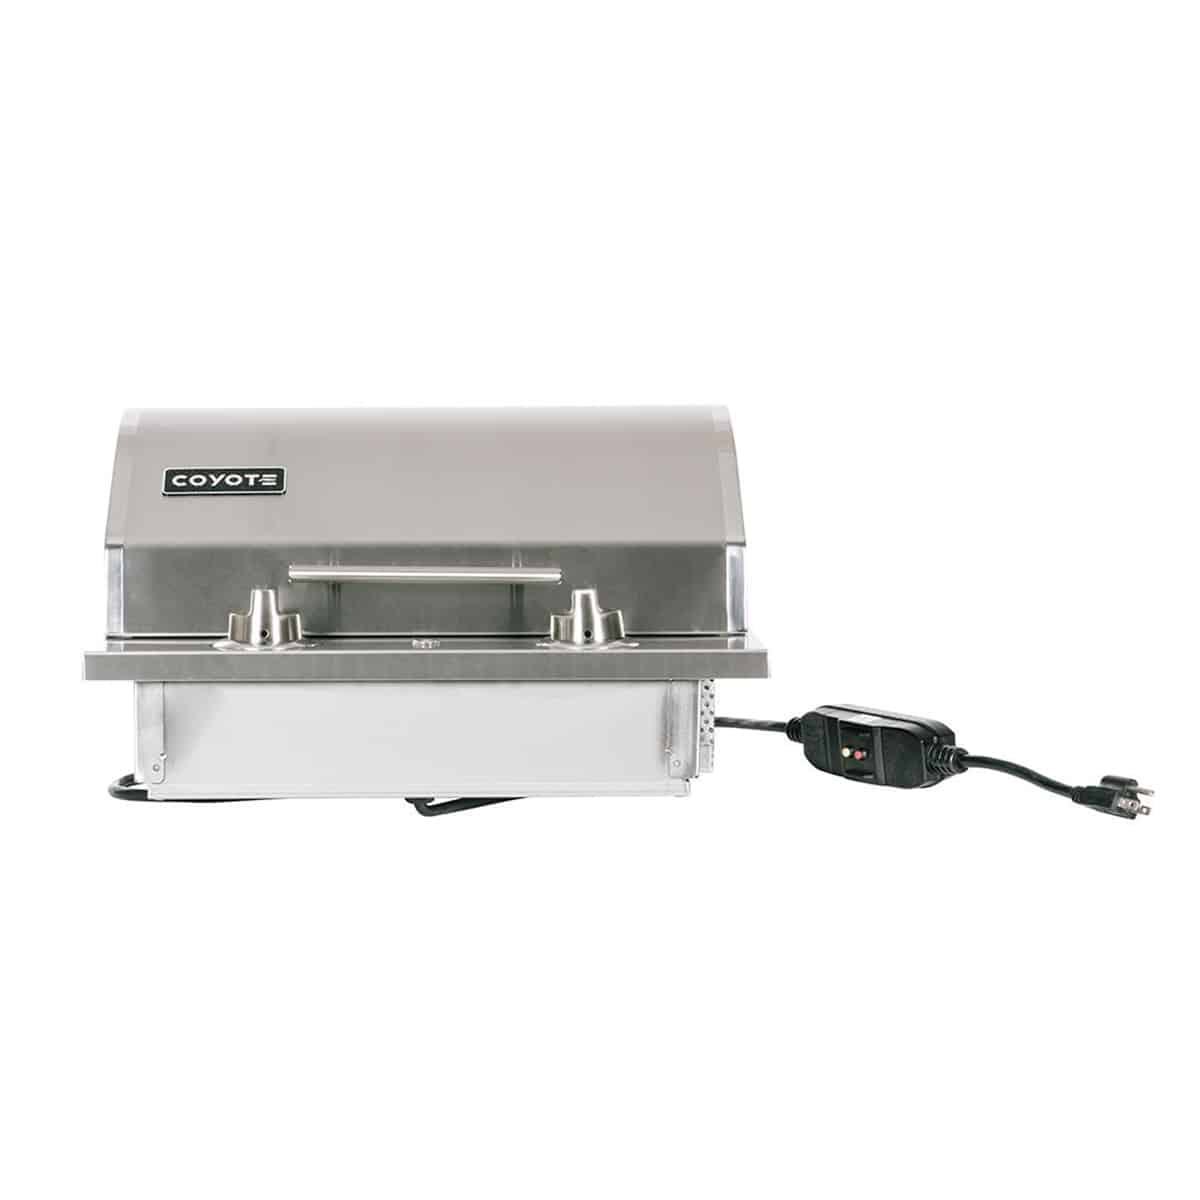 Coyote Single Burner 120V Electric Grill Closed Hood Cover with Cable